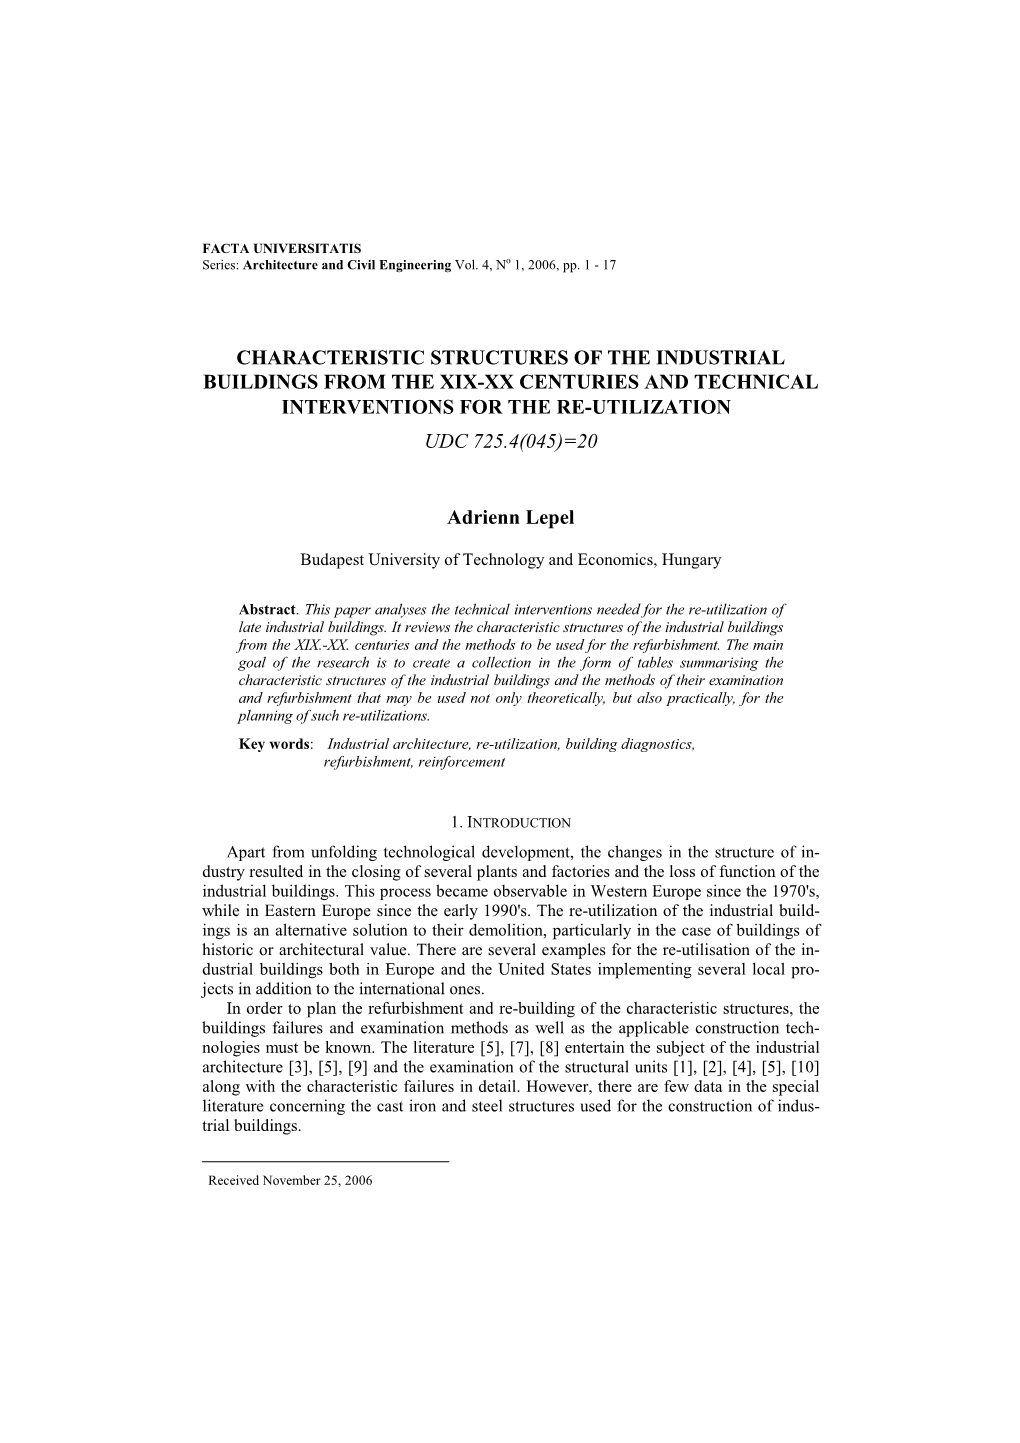 Characteristic Structures of the Industrial Buildings from the Xix-Xx Centuries and Technical Interventions for the Re-Utilization  Udc 725.4(045)=20